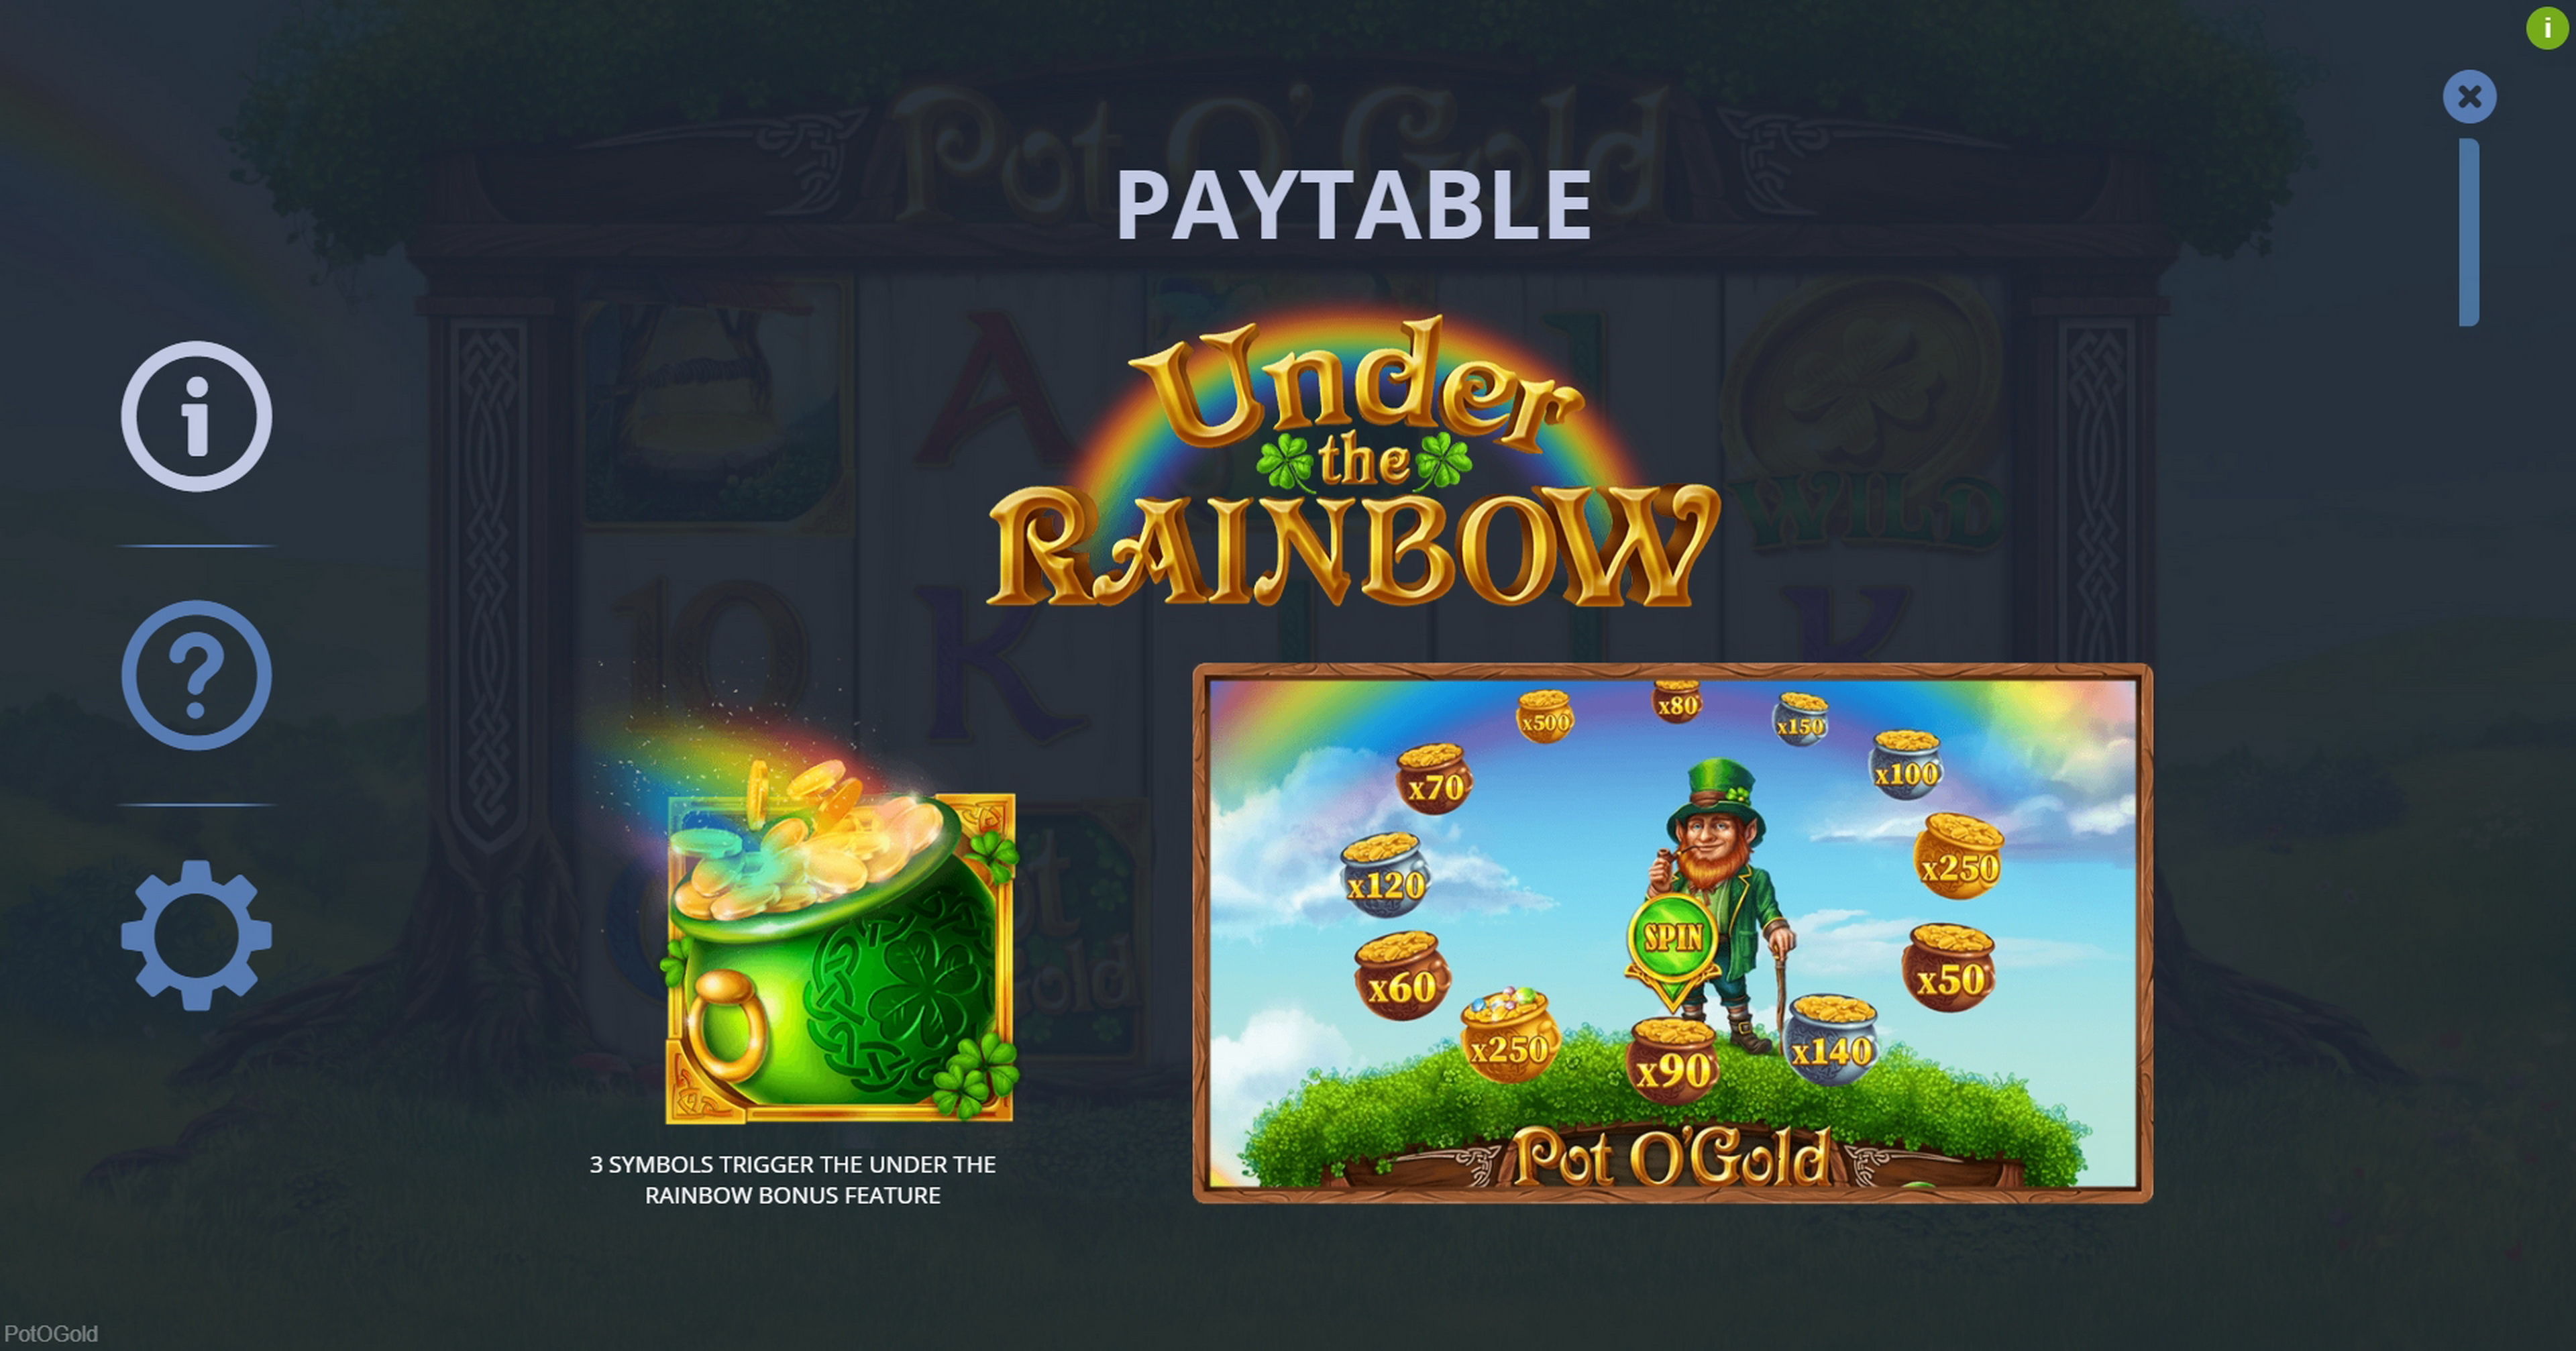 Info of Pot O'Gold Slot Game by PariPlay